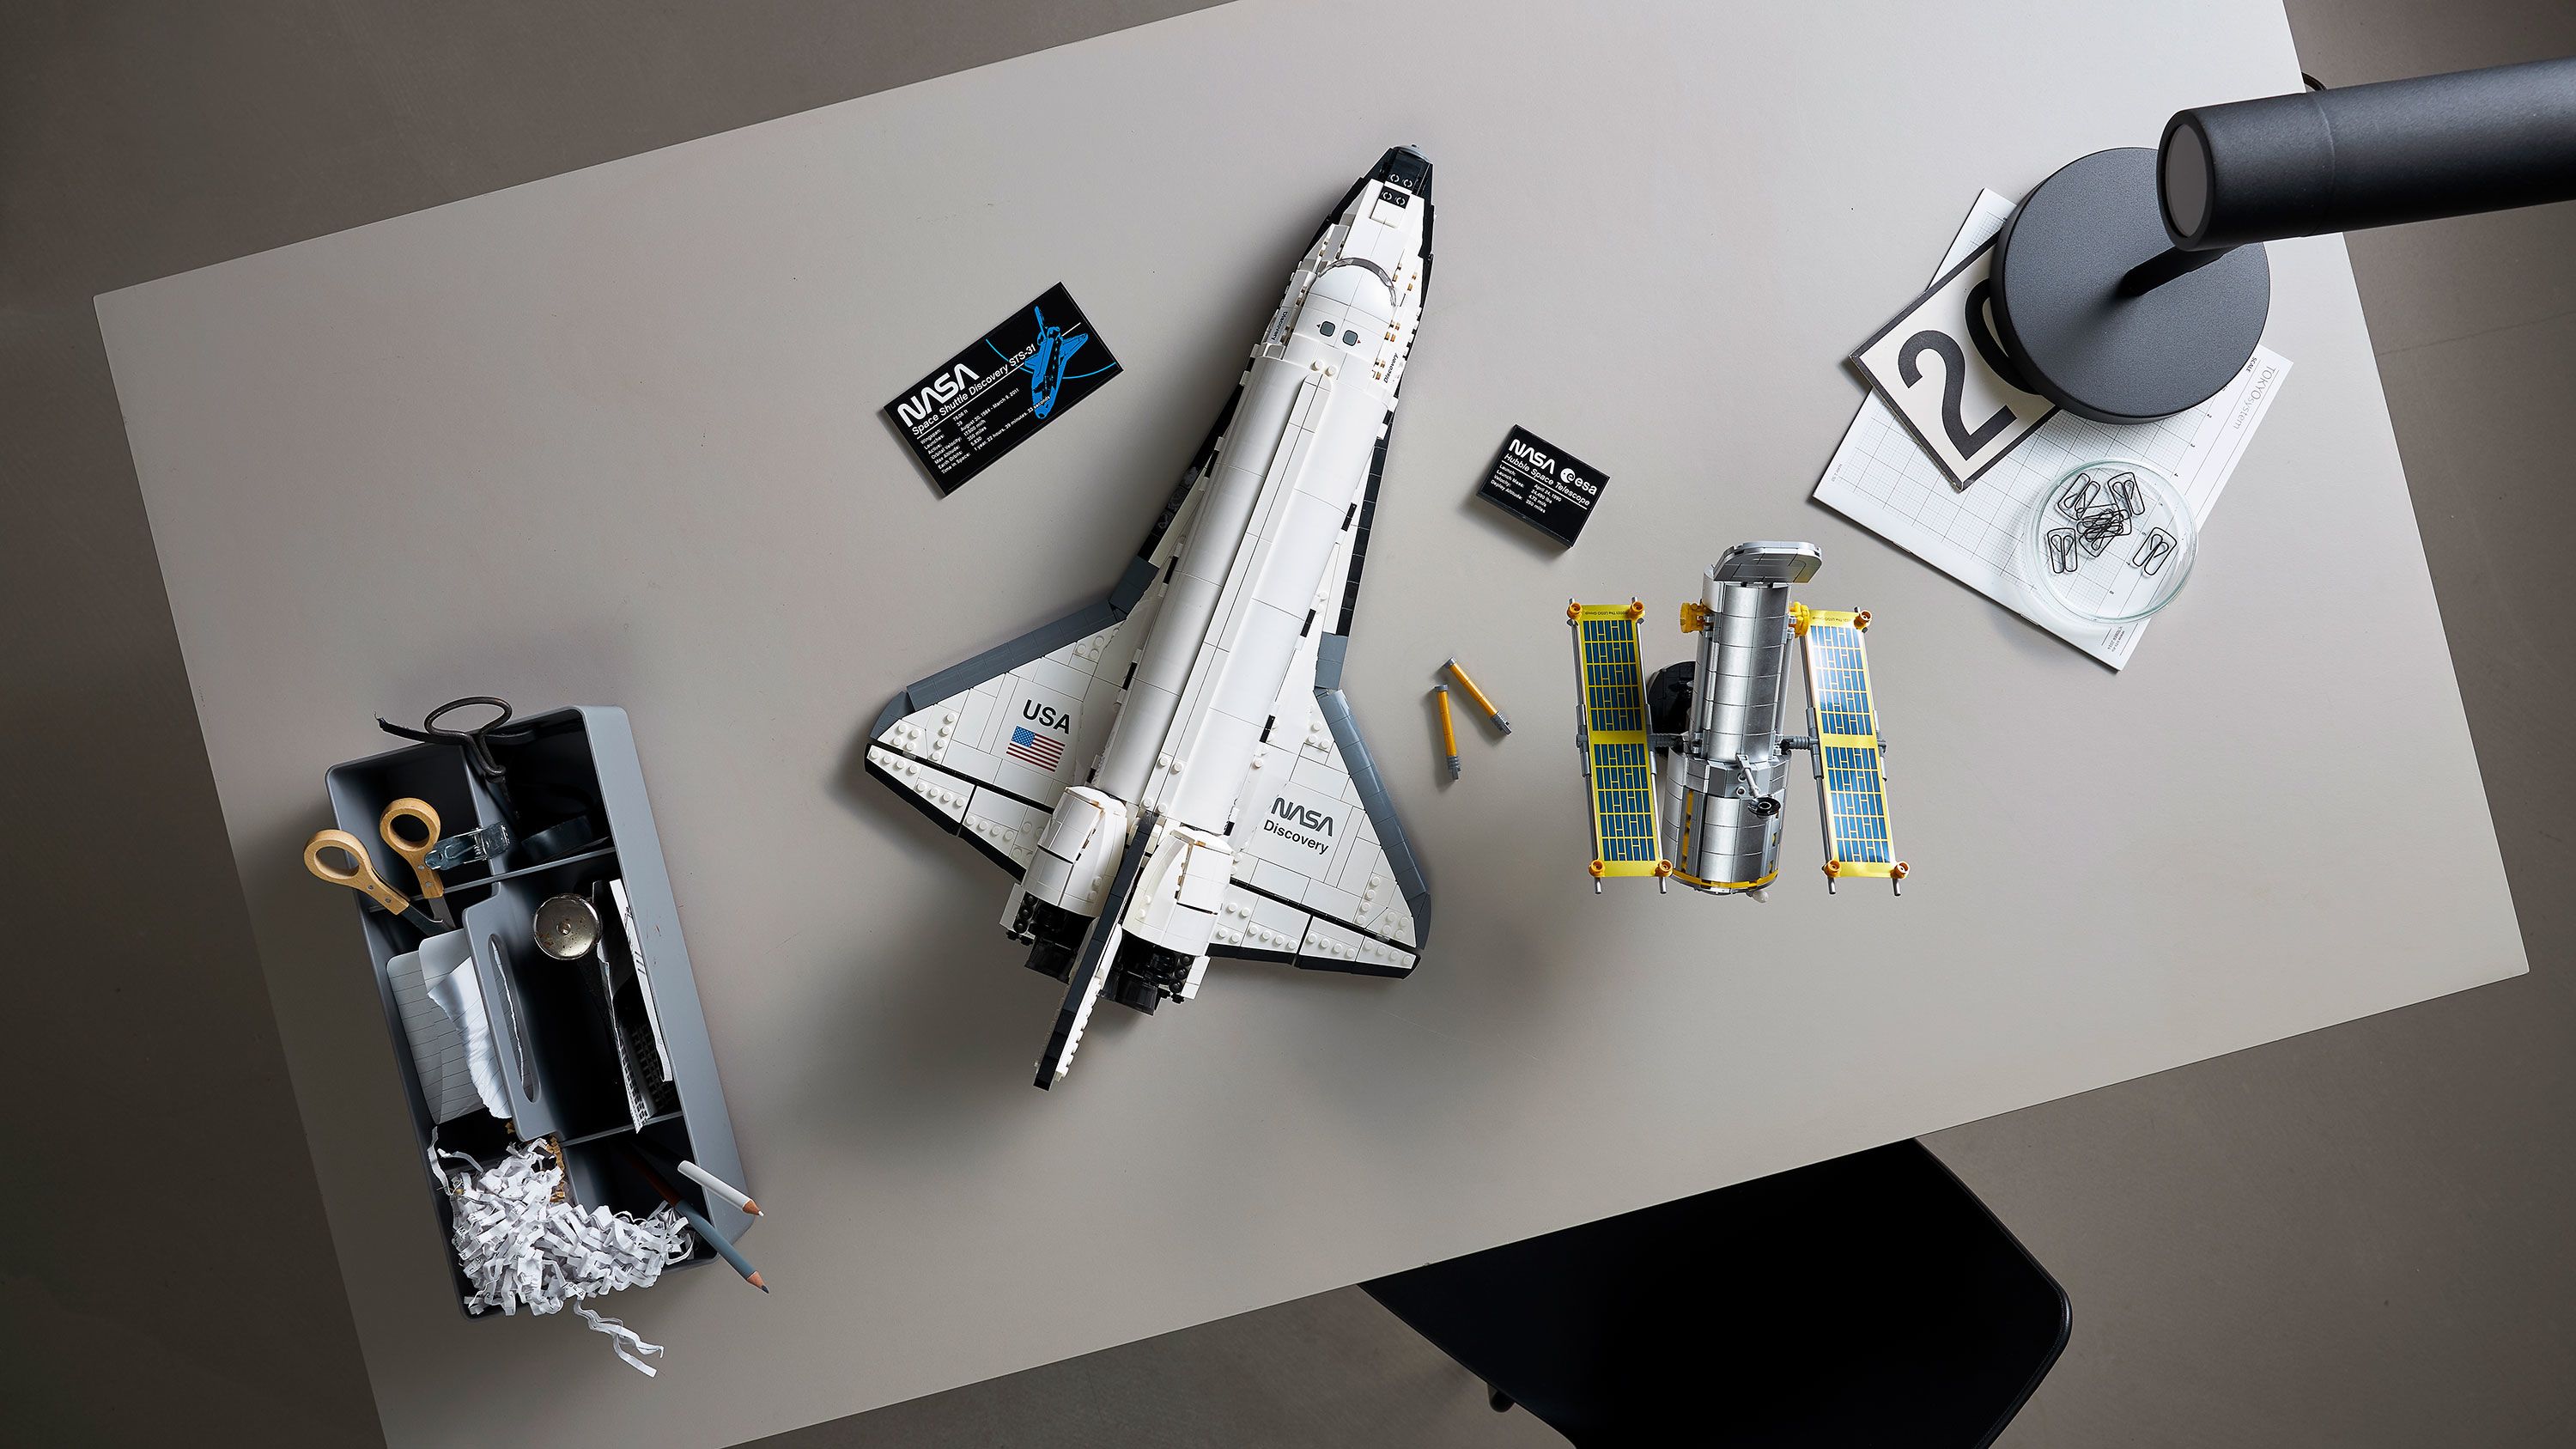 LEGO reveals space shuttle Discovery set featuring Hubble Space Telescope